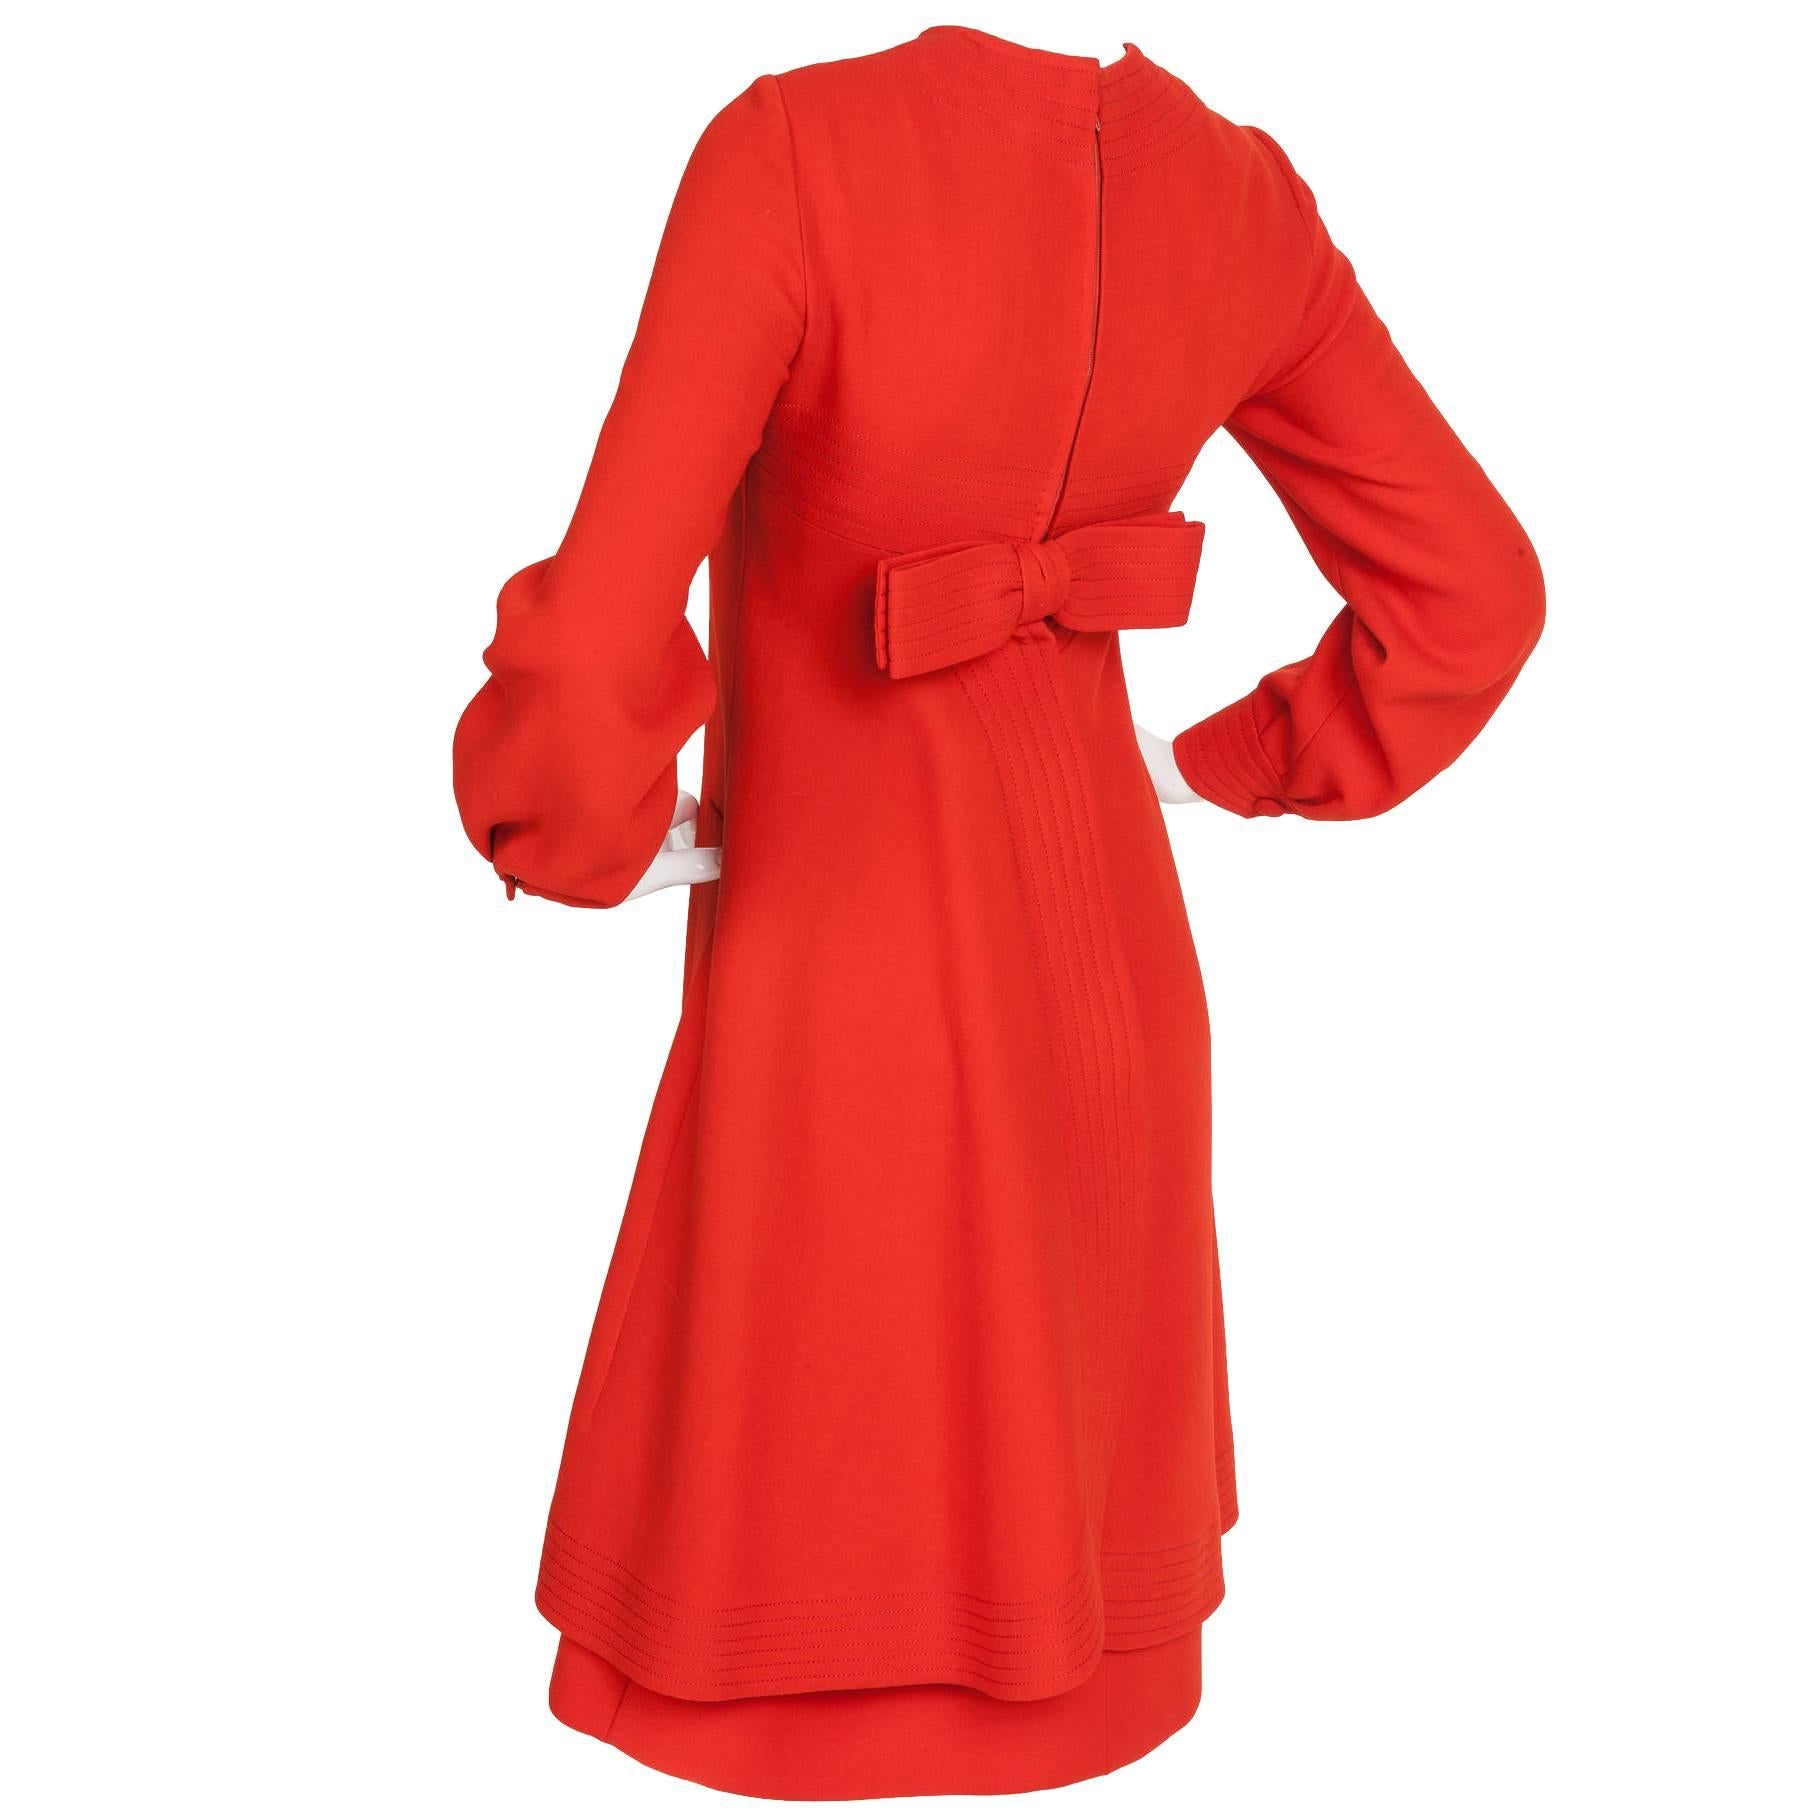 Pierre Cardin Red Wool Dress w/Channel Stitched Design Motif ca. 1970 For Sale